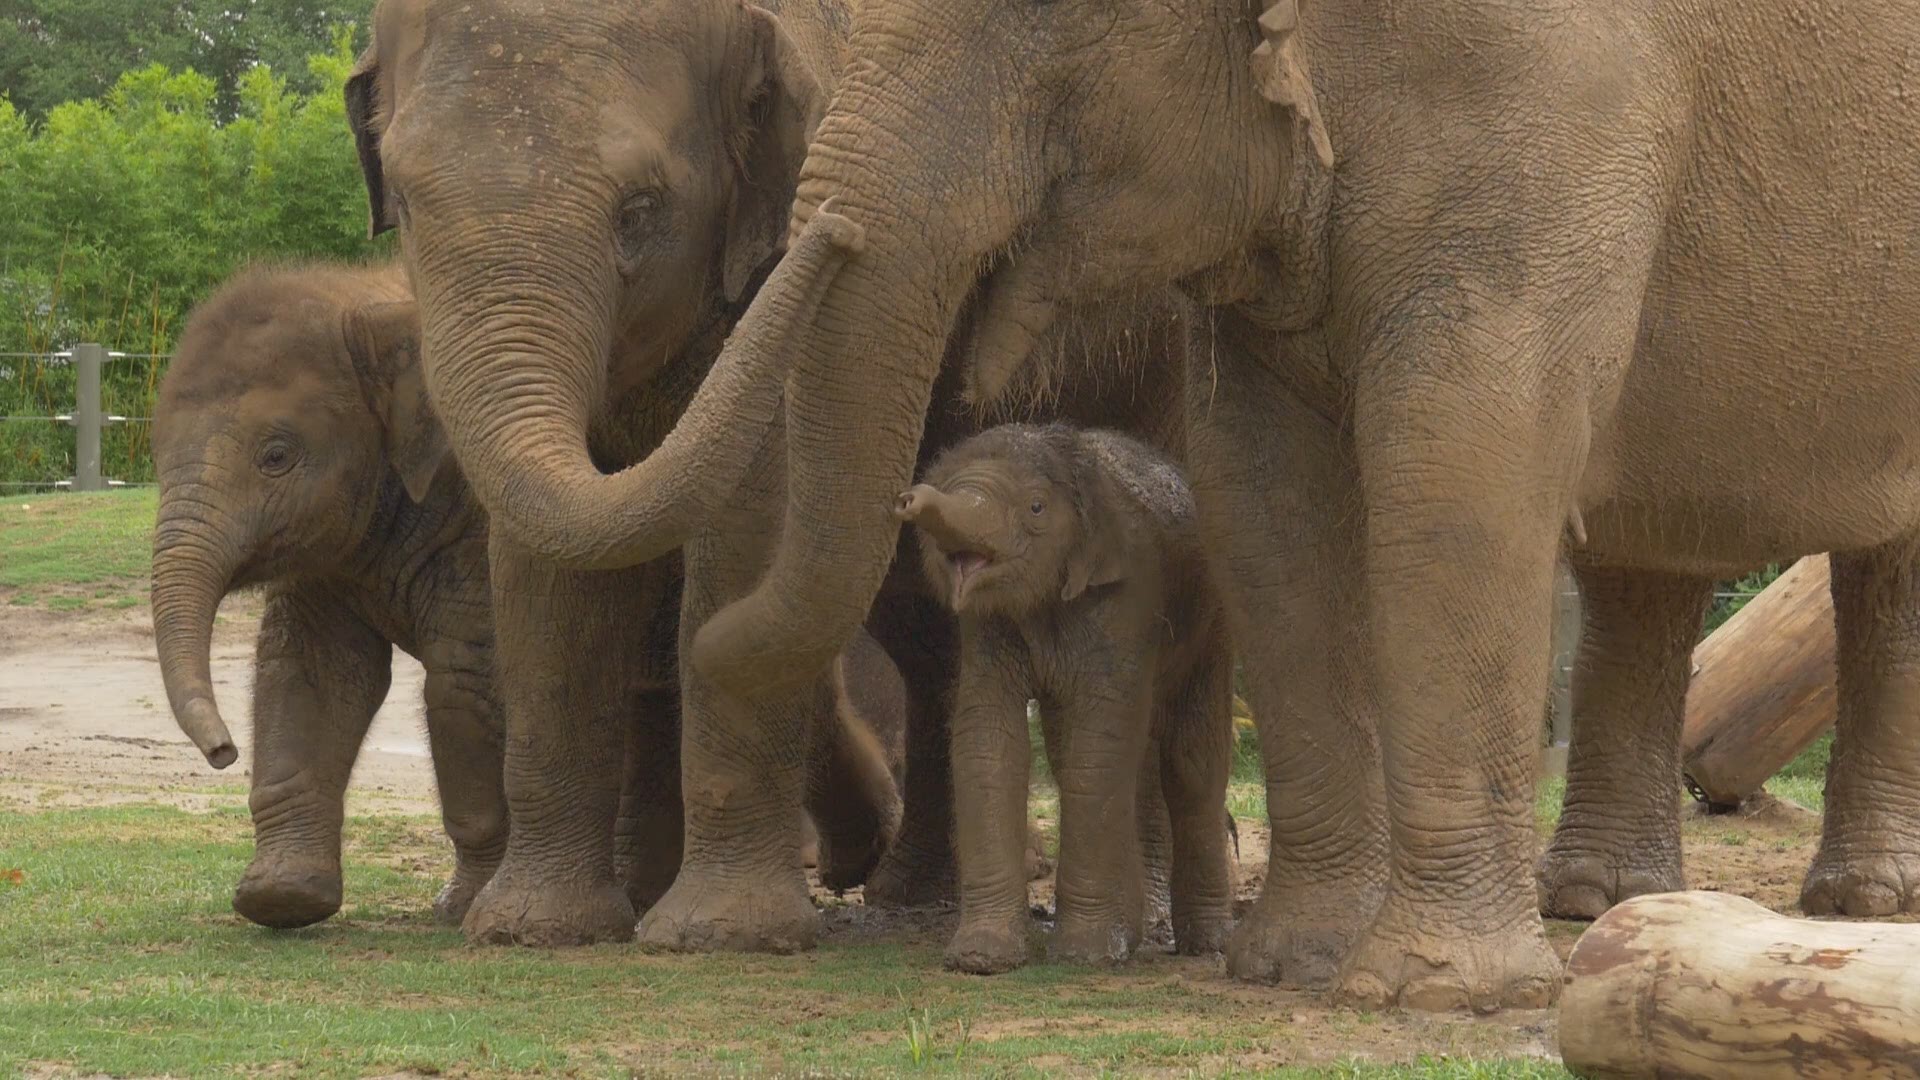 The Houston Zoo's new baby elephant was the guest of honor at a giant pachyderm party Tuesday. Tilly took her first steps outside with mom Tess following closely behind. The two-day-old baby was greeted warmly by the rest of the herd in the McNair Asian E